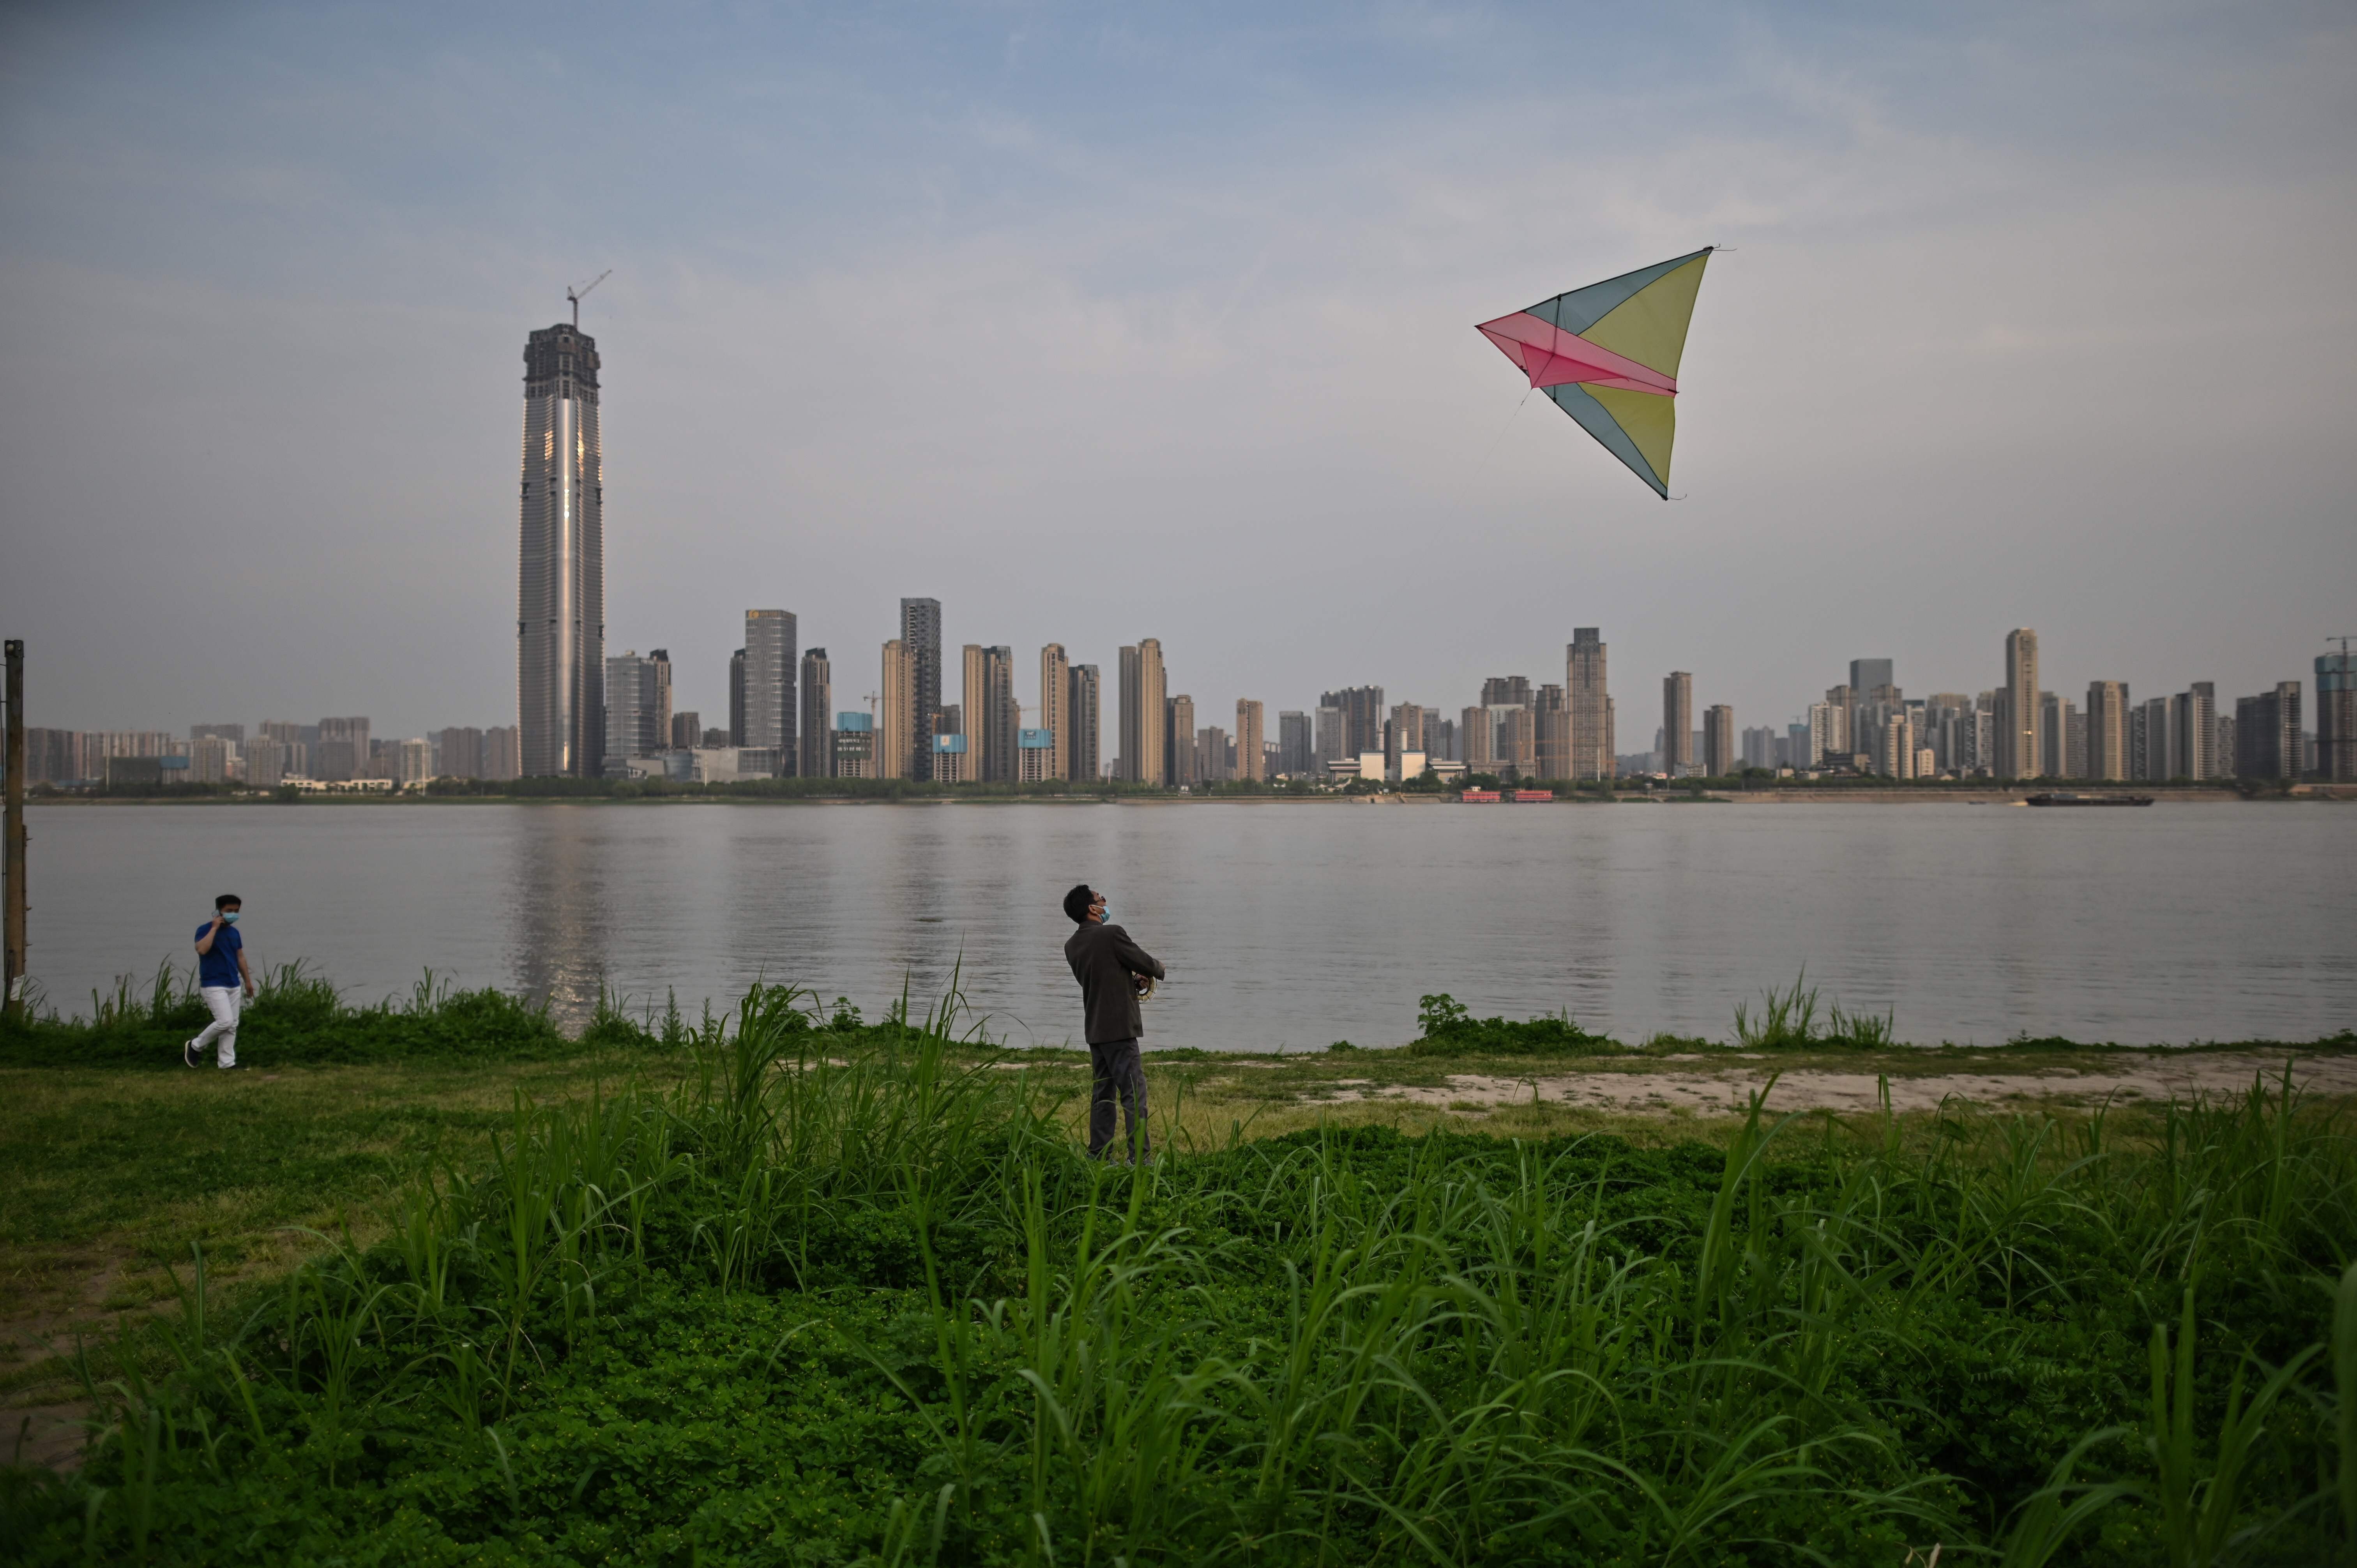 A man flies a kite along the Yangtze River in Wuhan on April 8, after the Chinese authorities lifted a more than two-month prohibition on outbound travel. Photo: AFP